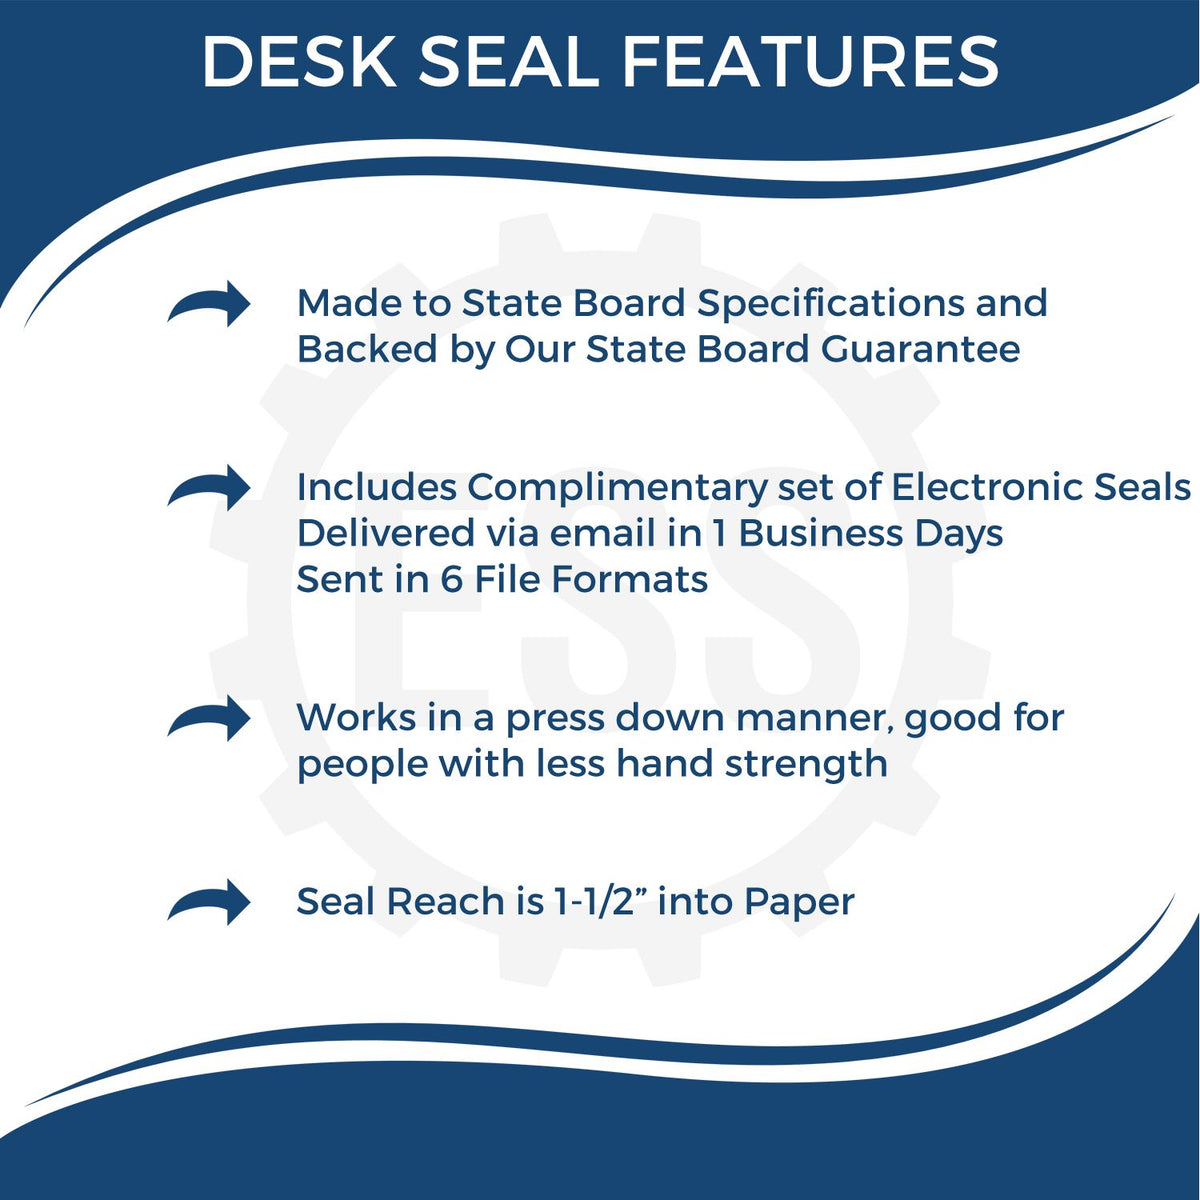 A picture of an infographic highlighting the selling points for the Oklahoma Geologist Desk Seal